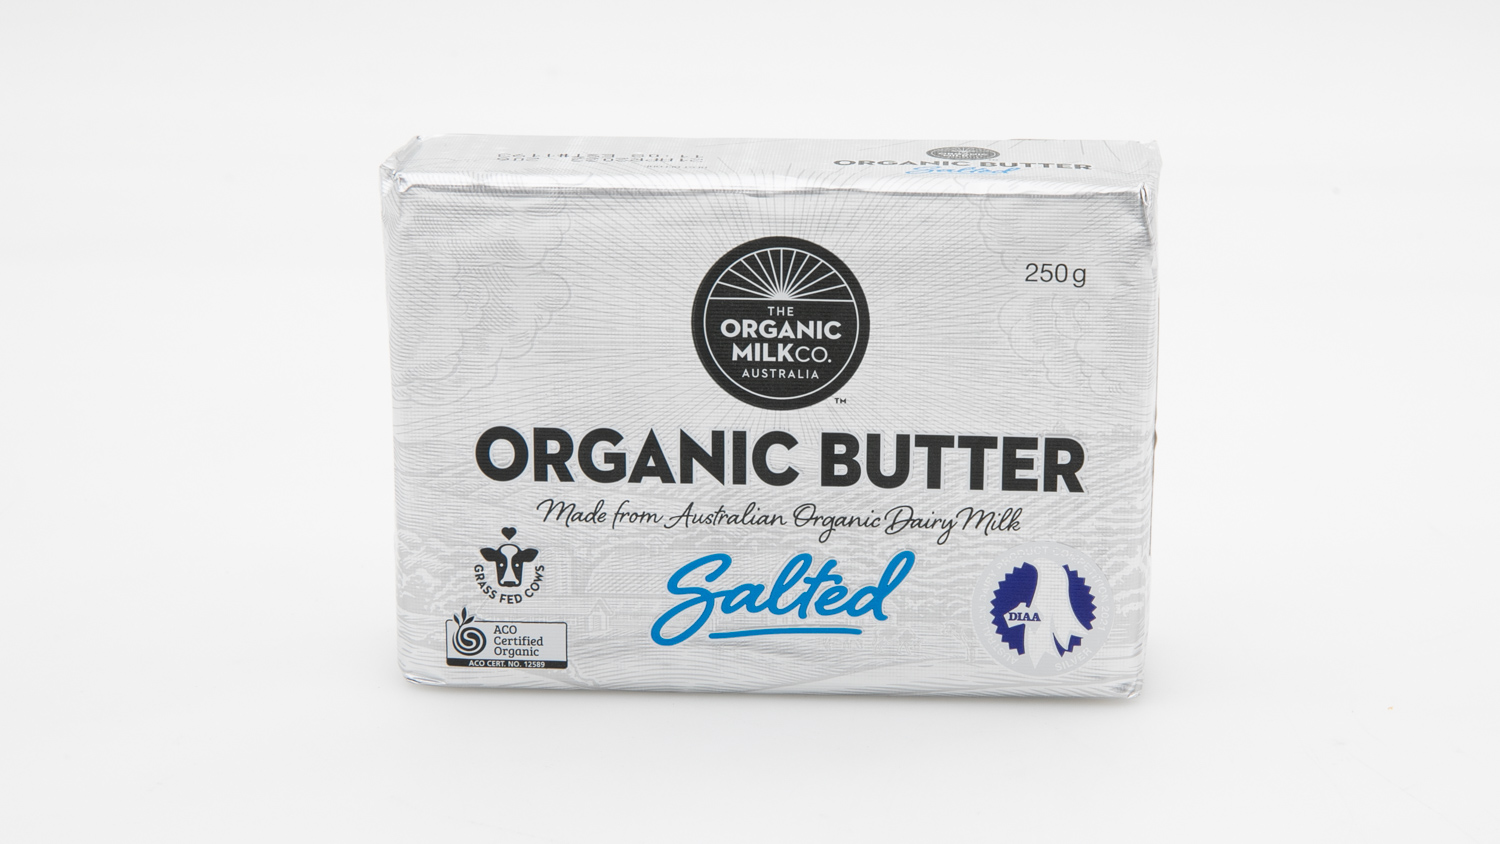 The Organic Milk Co Organic Salted Butter carousel image